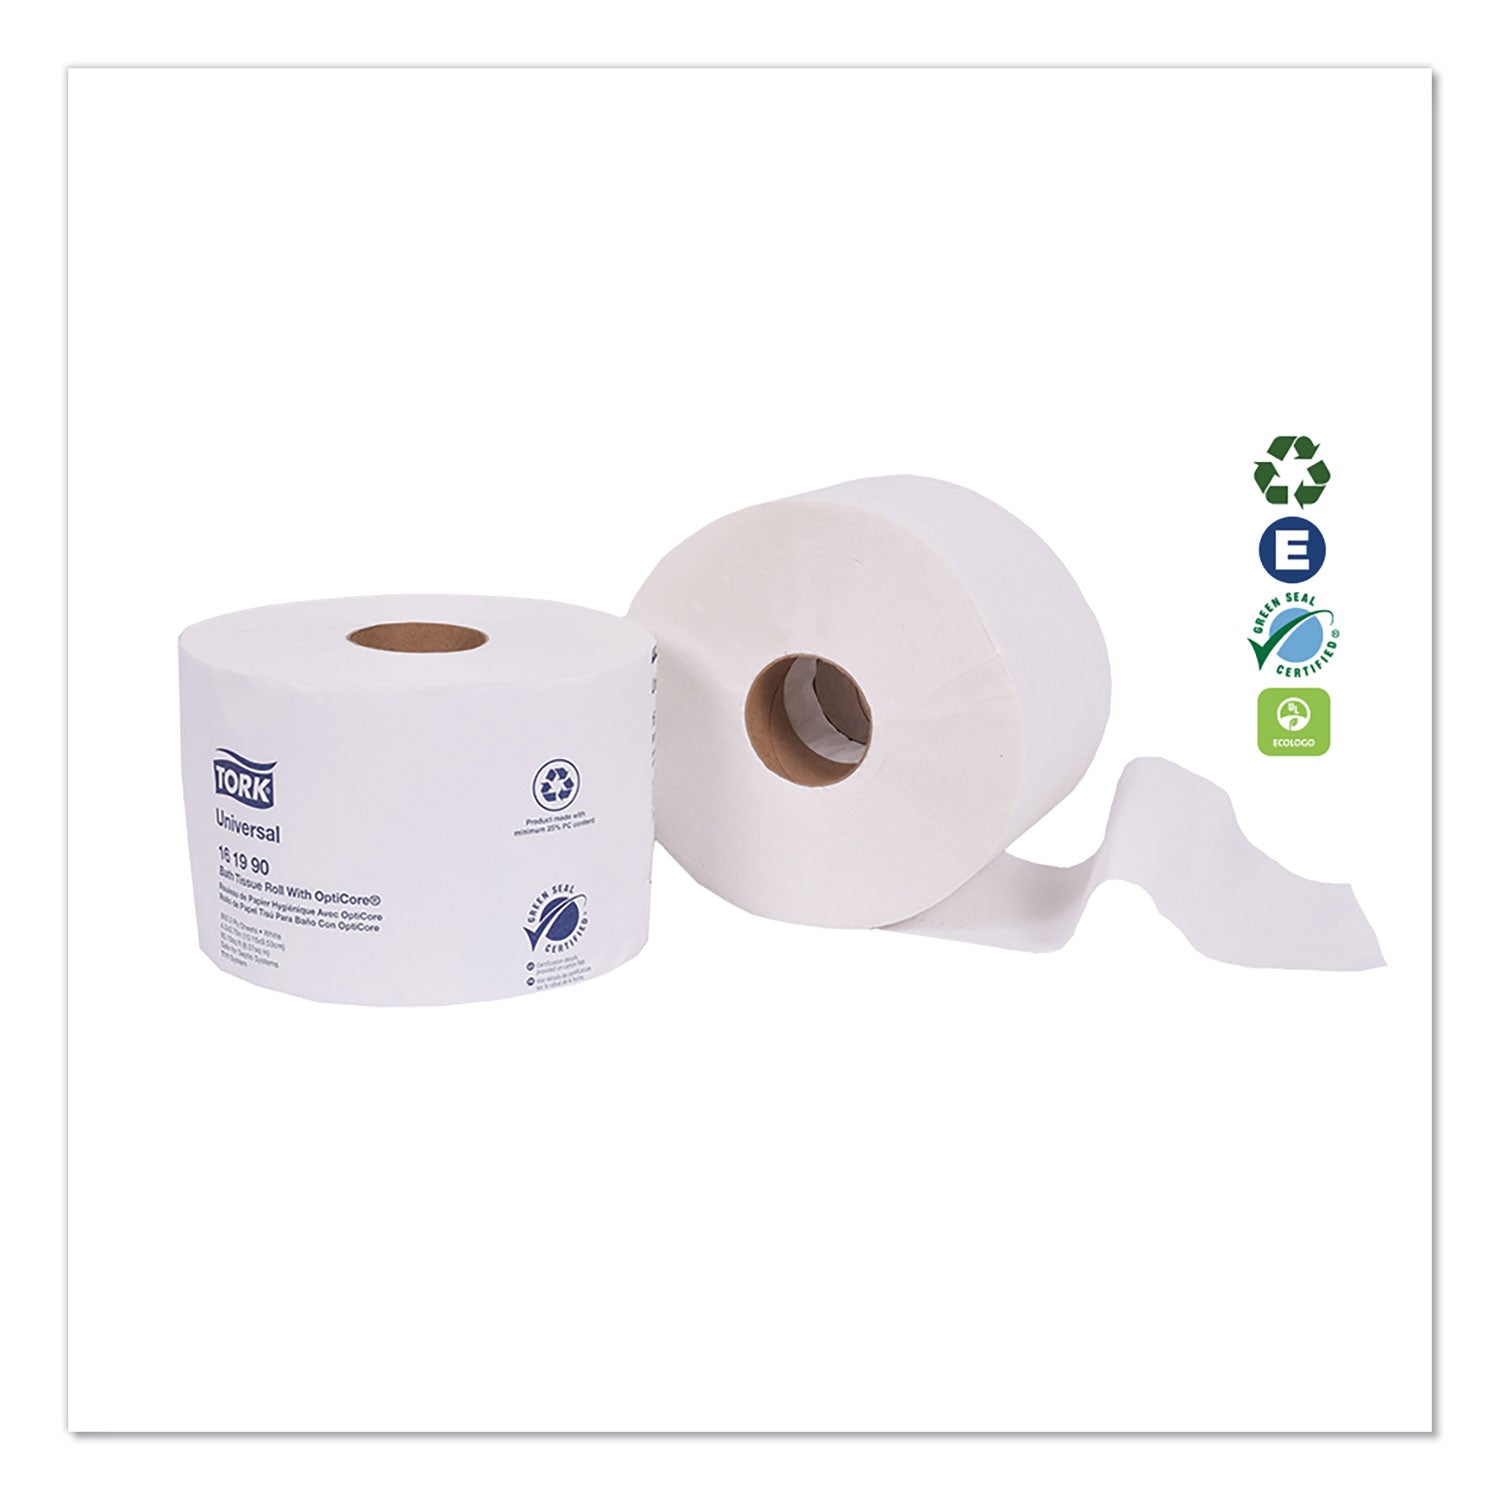 universal-bath-tissue-roll-with-opticore-septic-safe-2-ply-white-865-sheets-roll-36-carton_trk161990 - 2